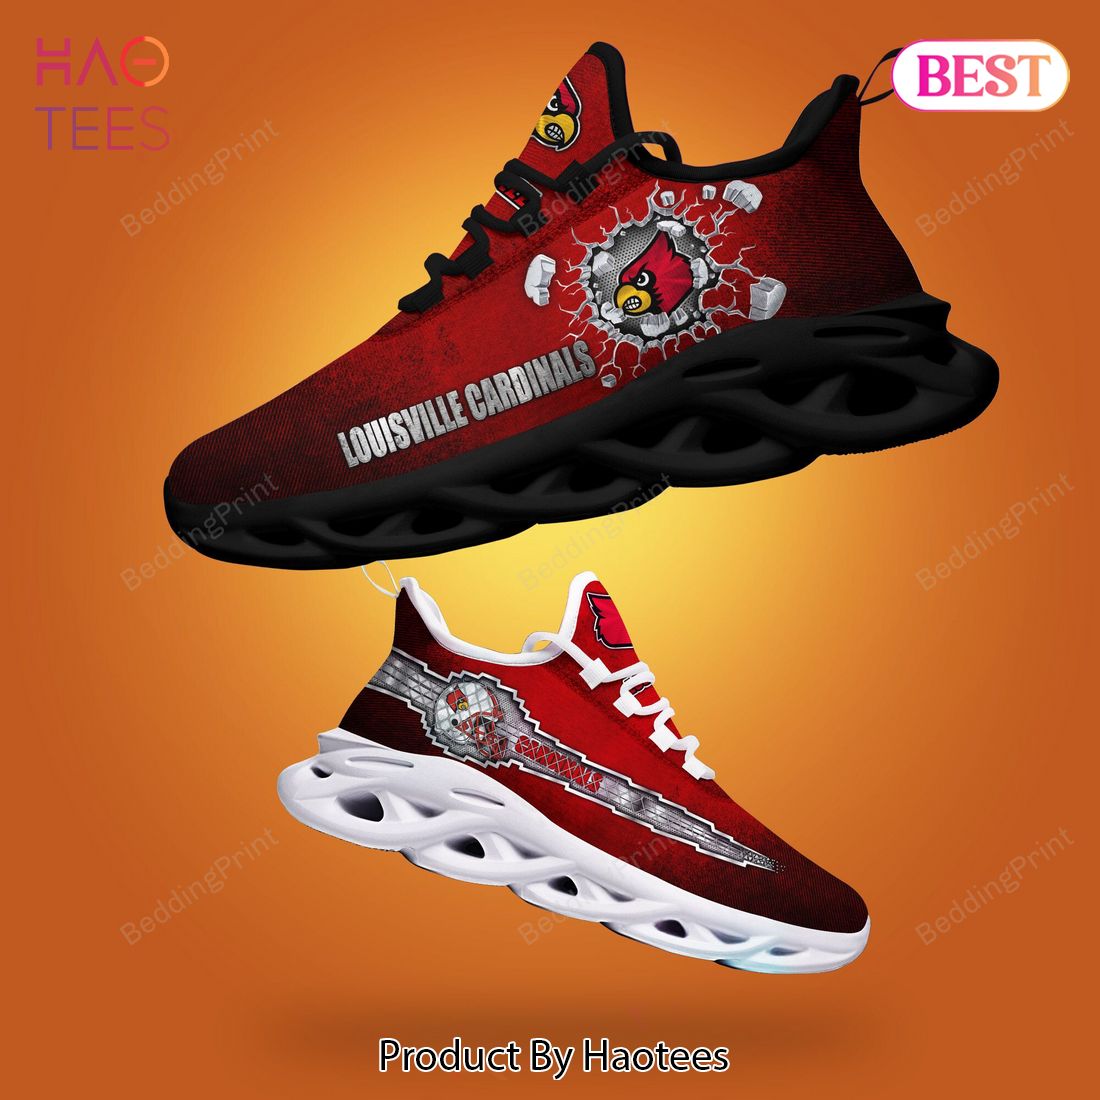 Louisville Cardinals basketball shoes during the NCAA College